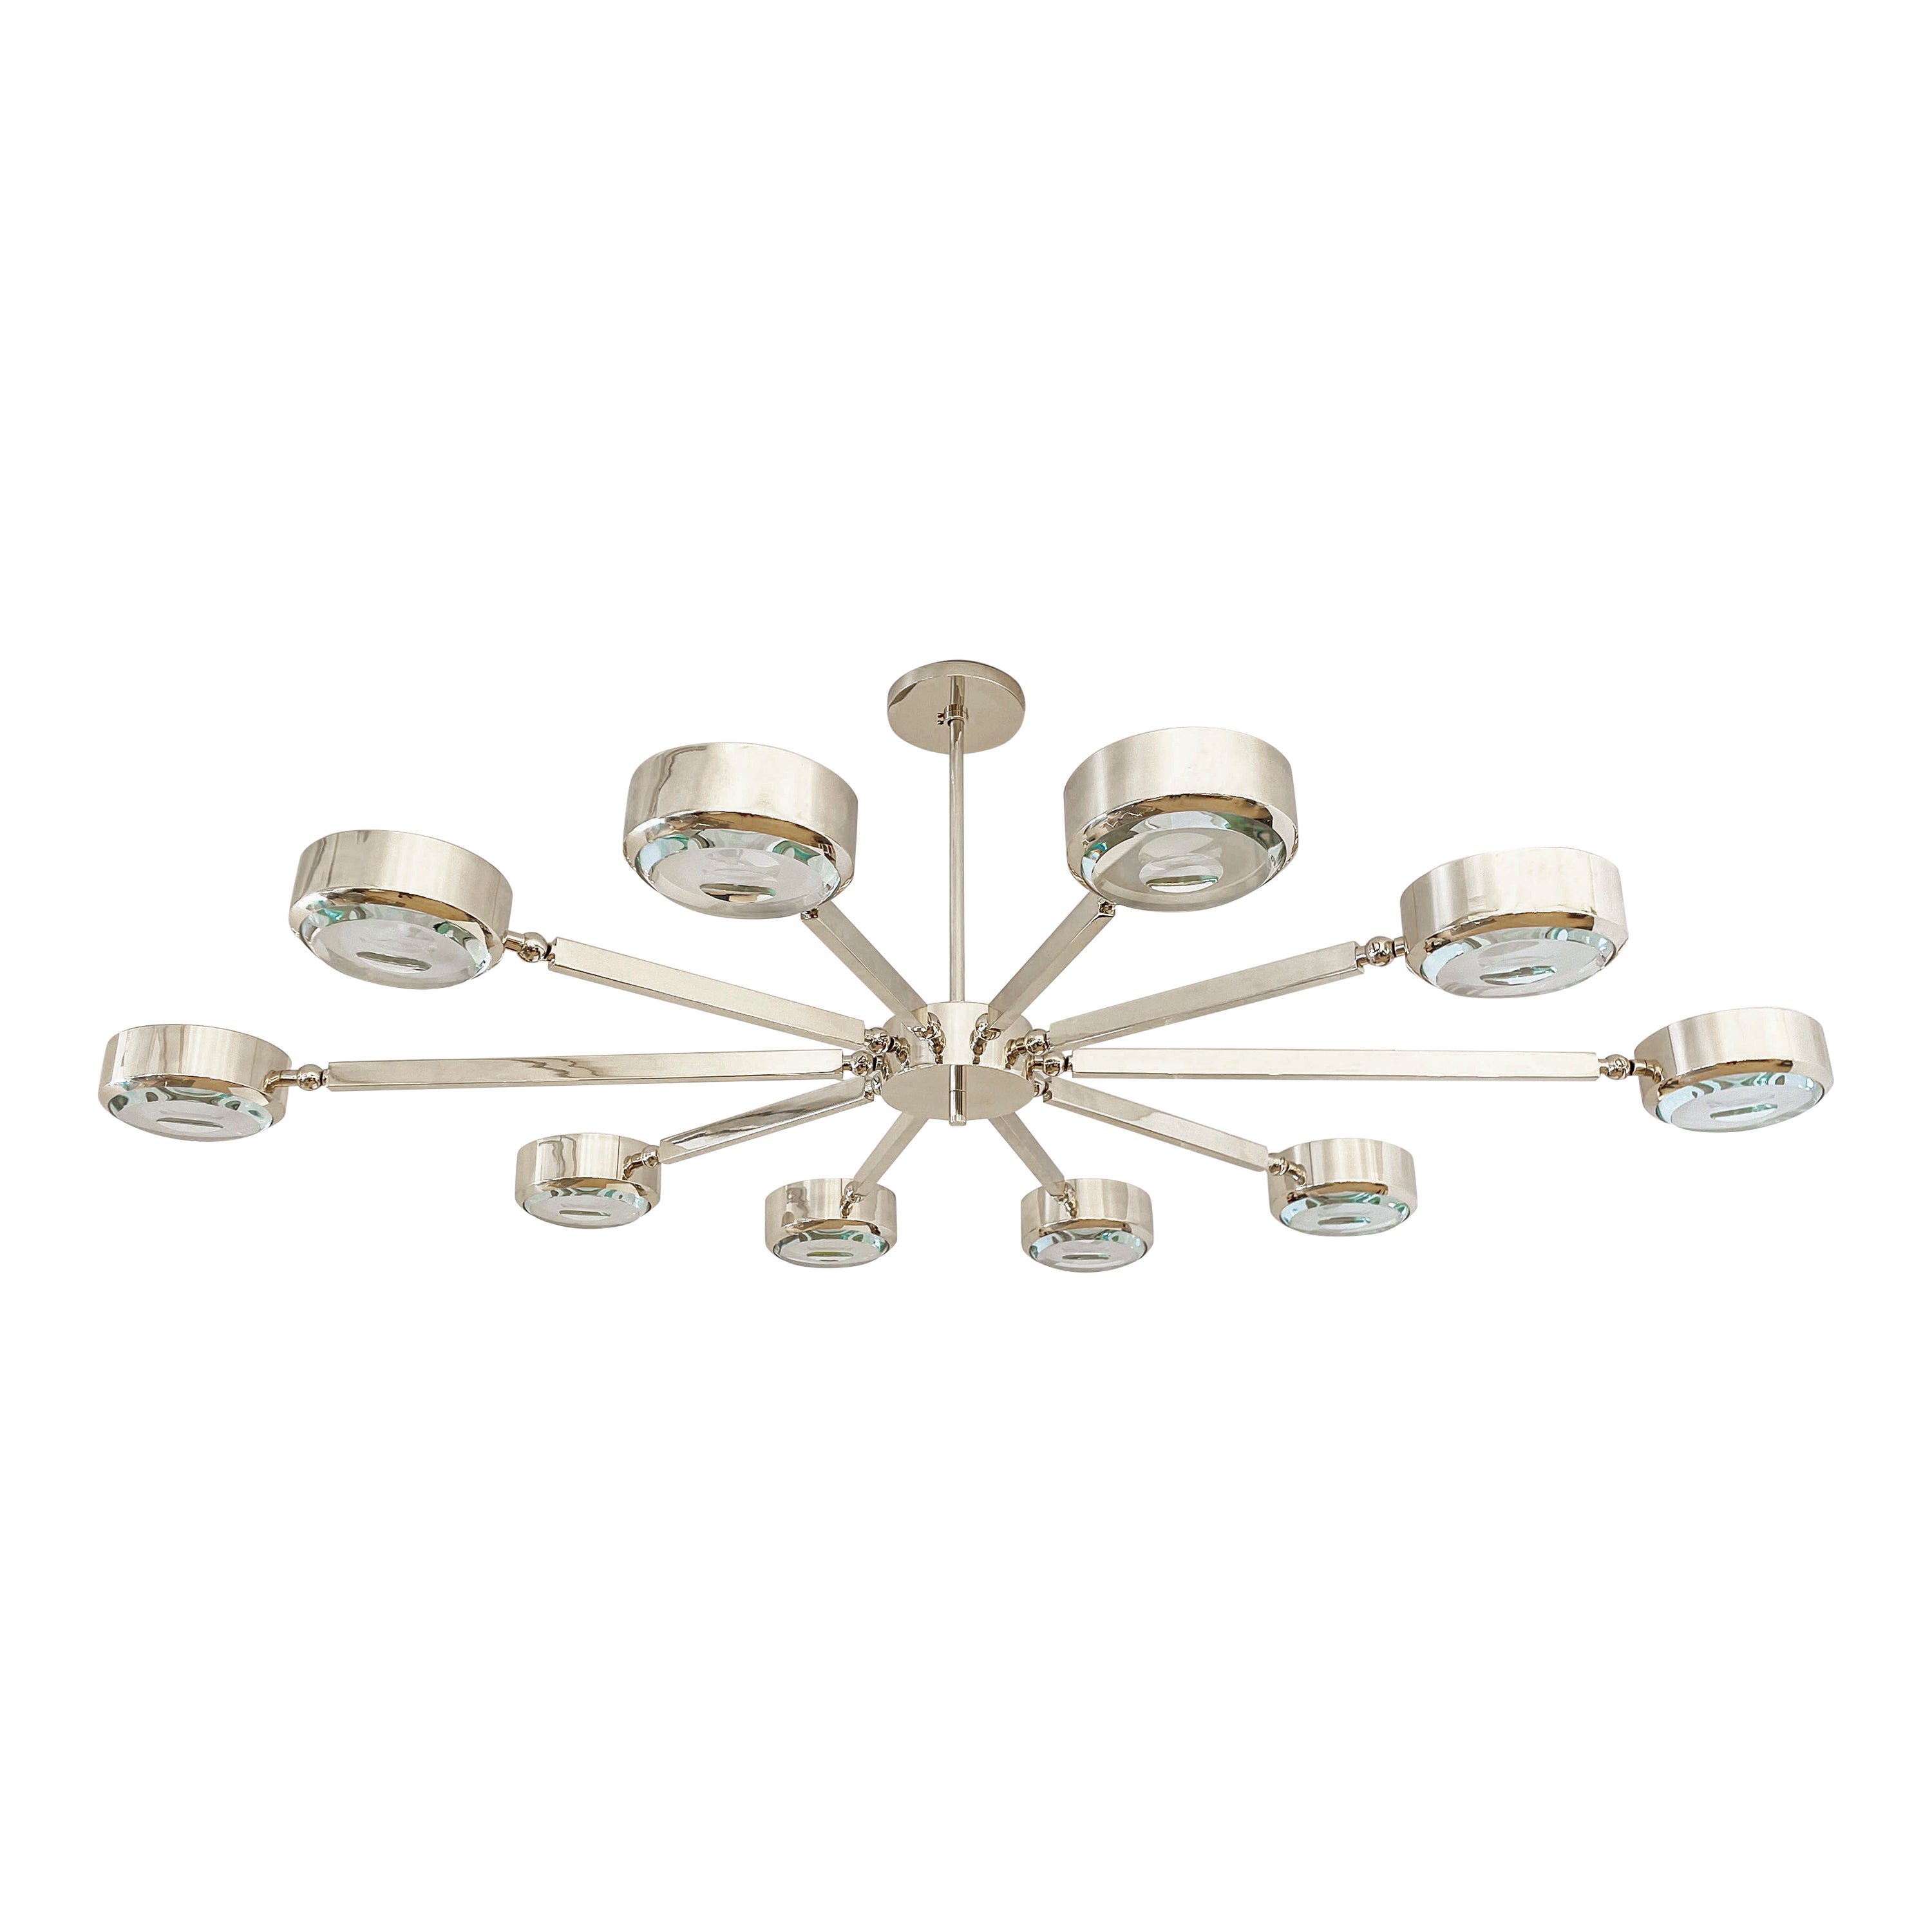 Oculus Oval Ceiling Light by Gaspare Asaro- Polished Nickel with Carved Glass For Sale